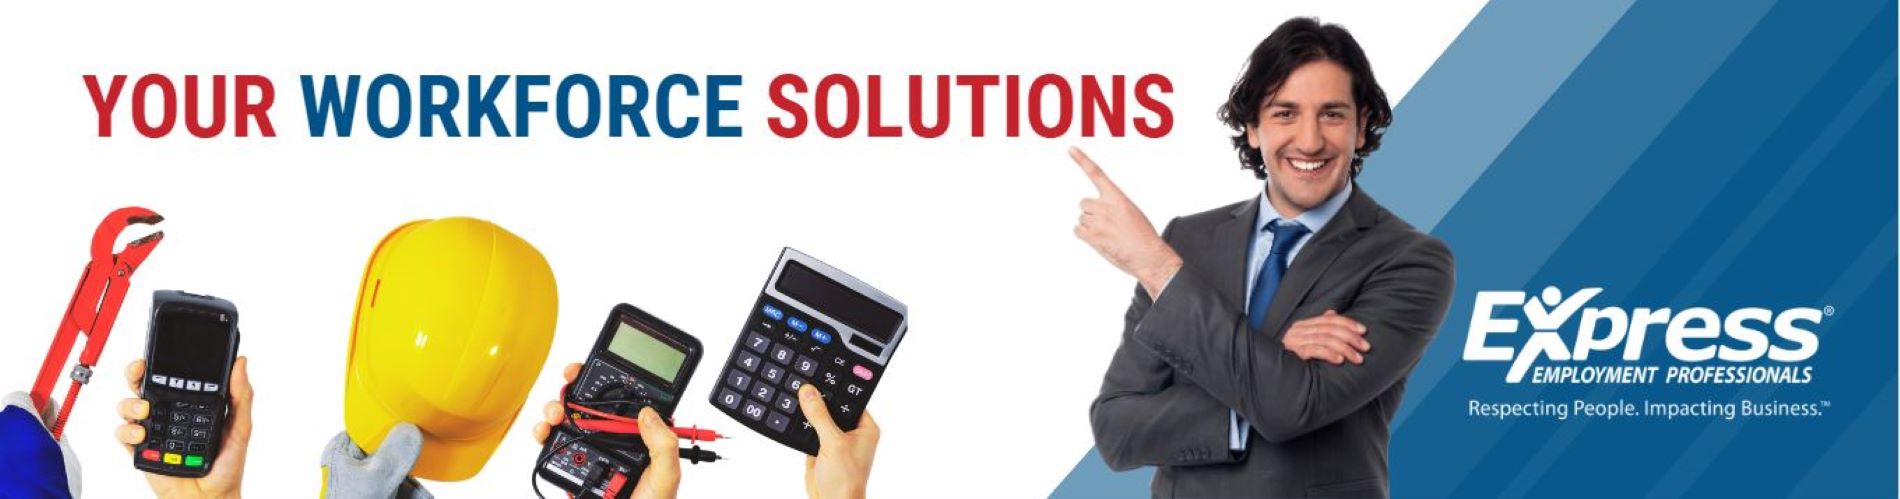 banner-workforce-solutions-london - resized